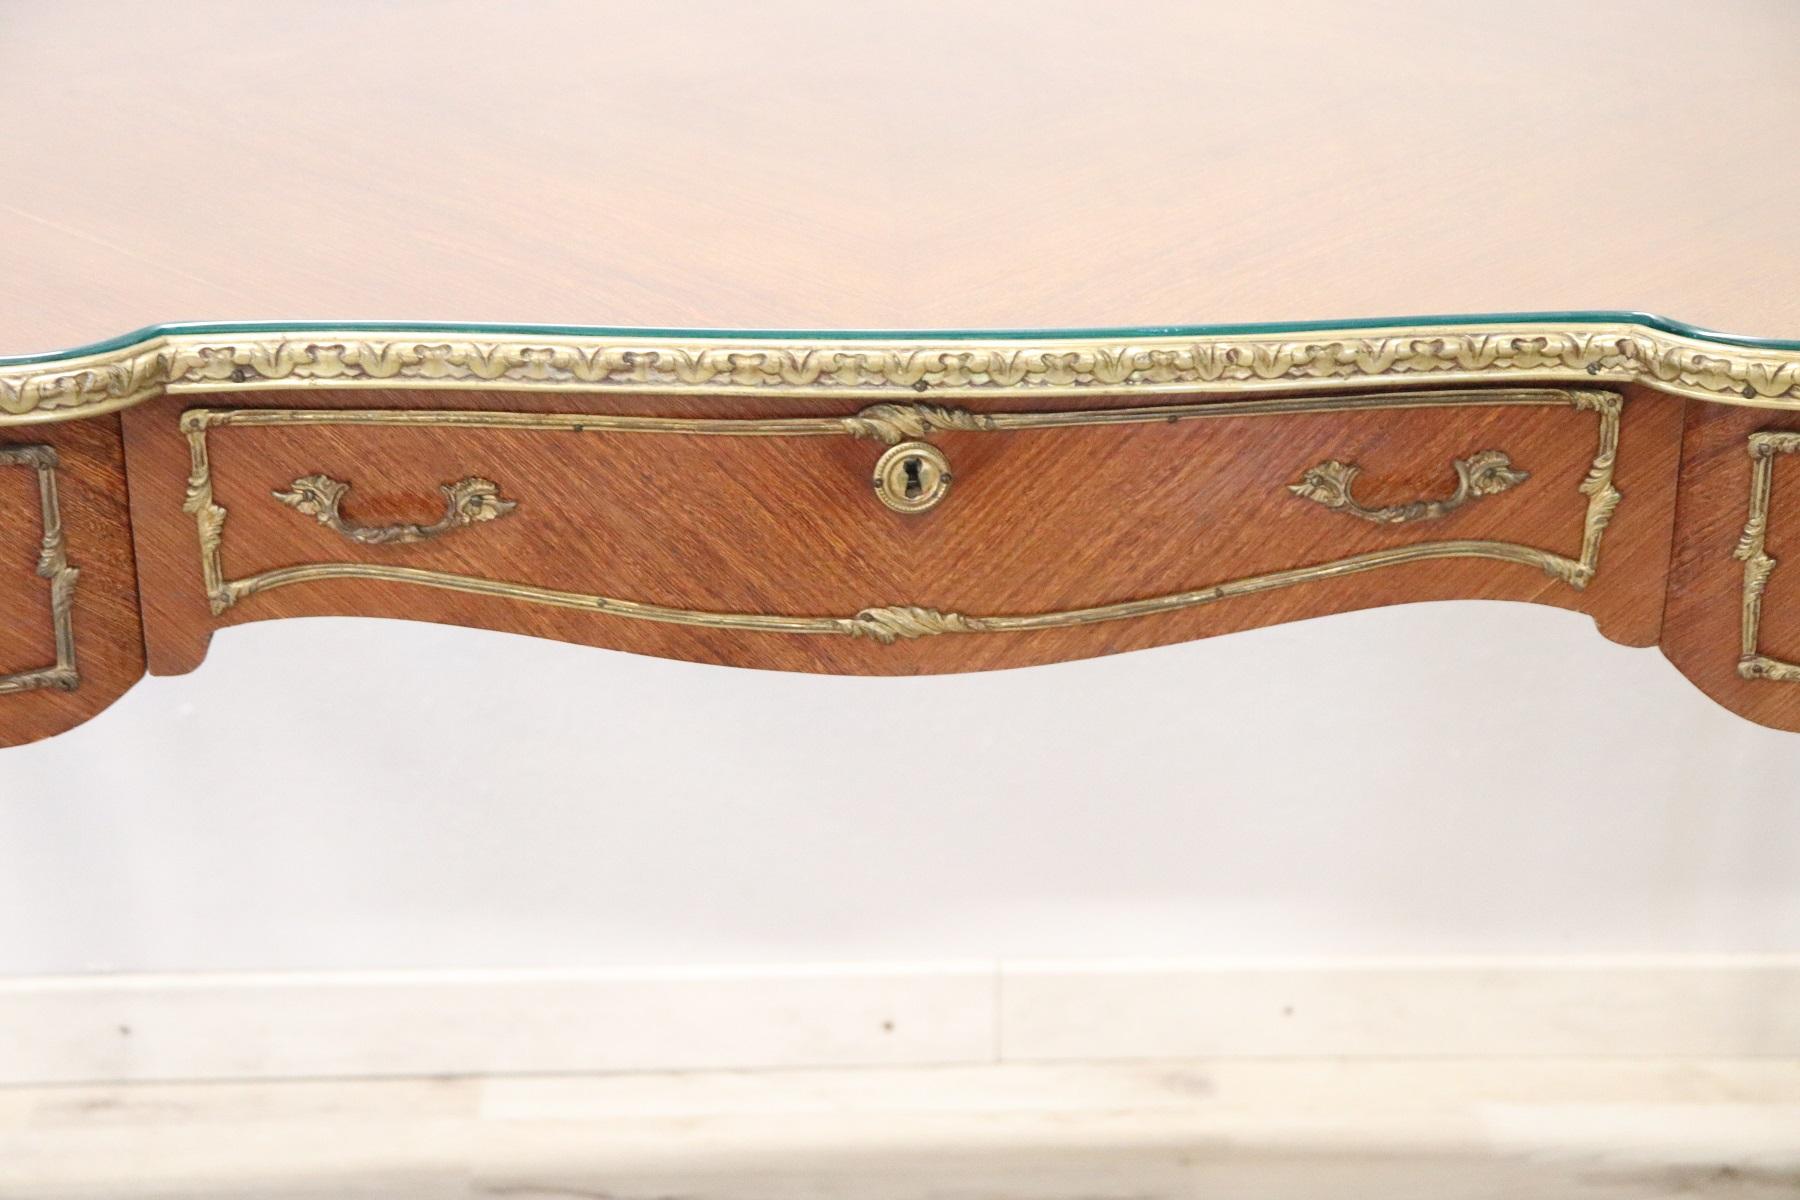 Inlay 20th Century French Louis XV Style Wood Golden Bronzes Desk or Writing Table